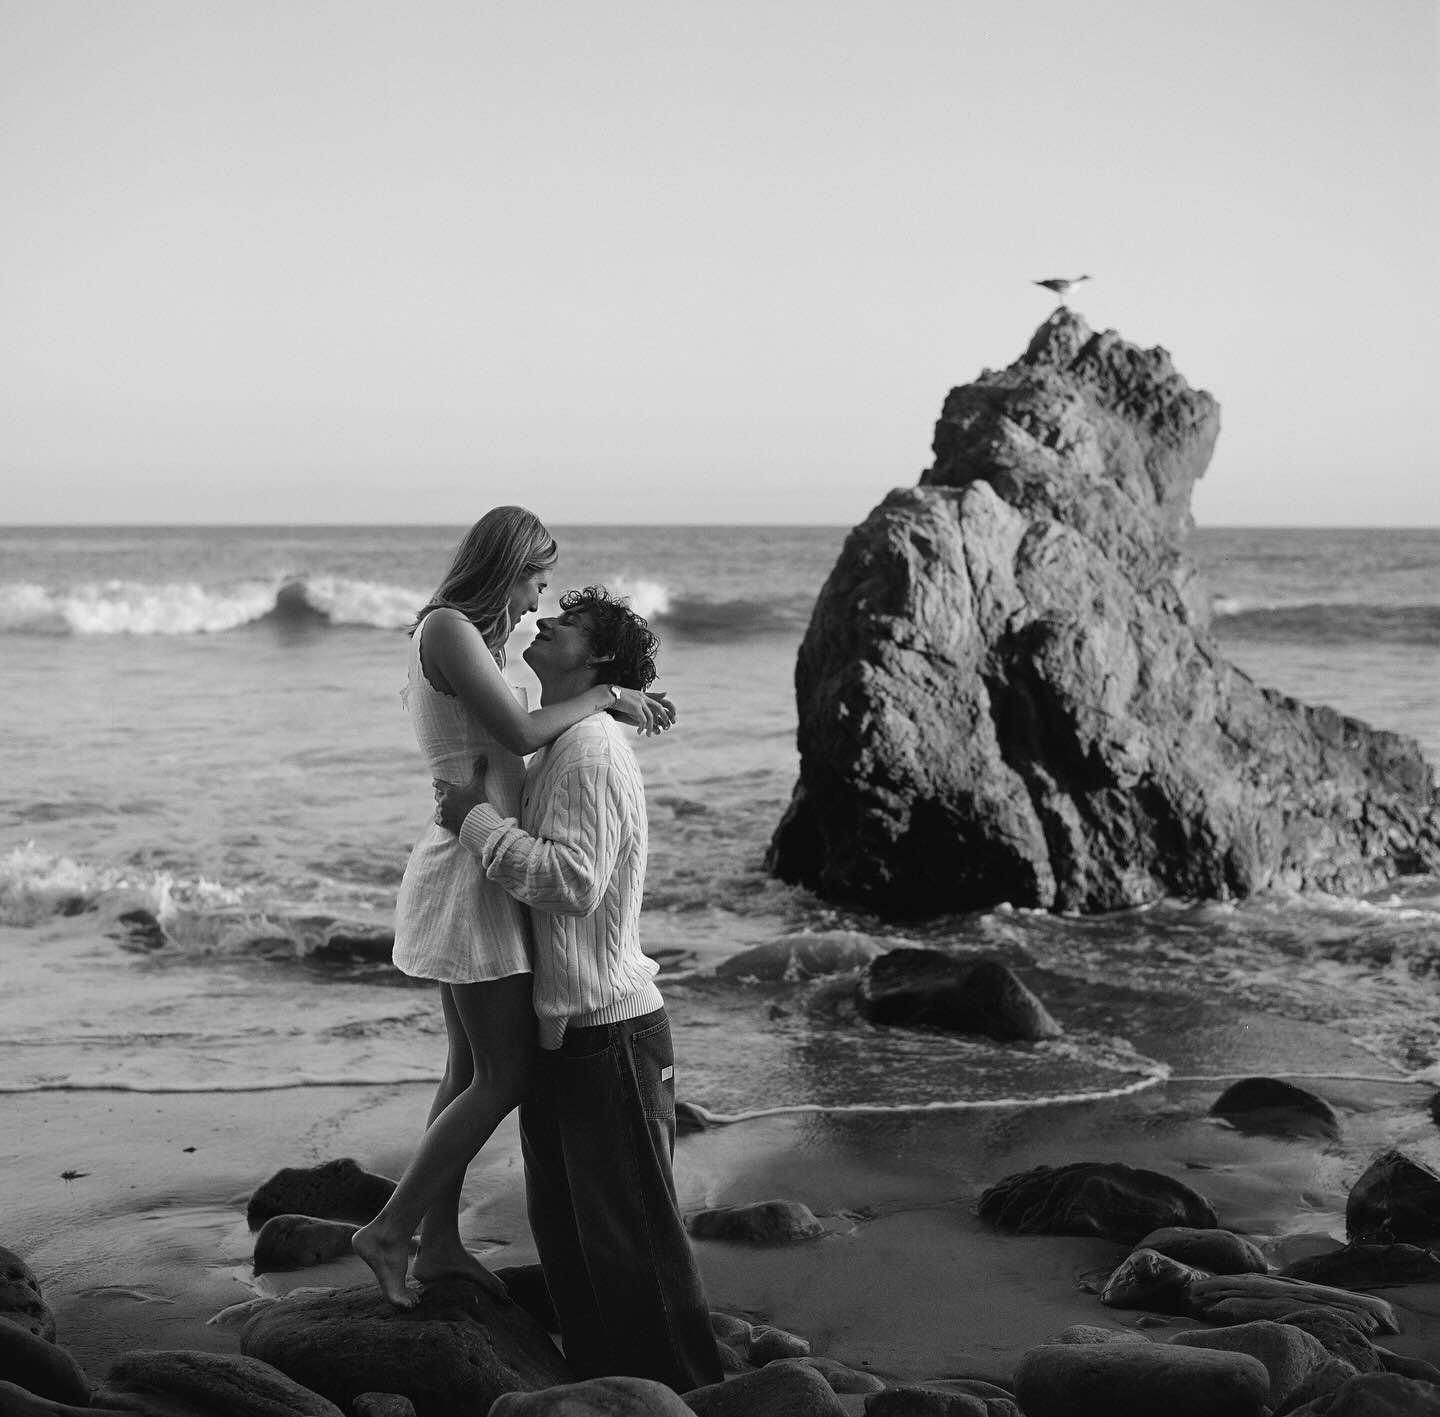 Ava + Jake in love on 120 film in Malibu 🎞️

The depth and softness and detail that you can get with medium format film and the Hasselblad&hellip;oh mama mama!! It takes longer to set, it&rsquo;s all manual, it&rsquo;s a bit more of a hassle (see wh